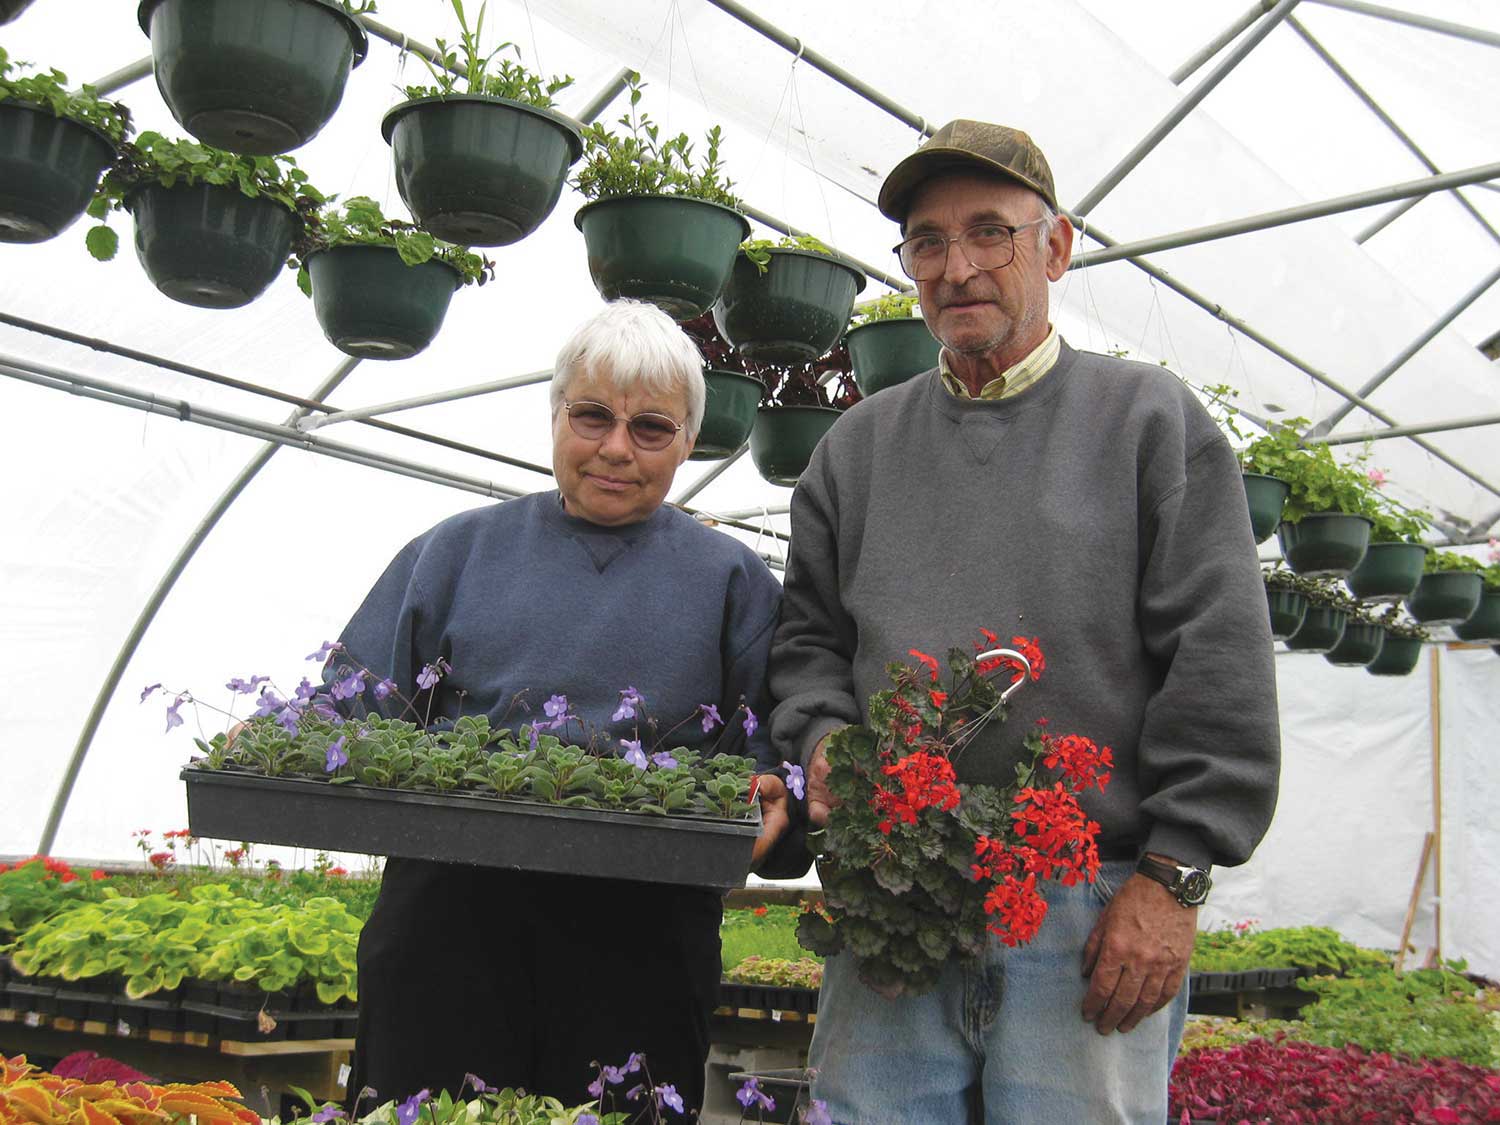 Mertyann and Art Boe in a greenhouse, holding plants